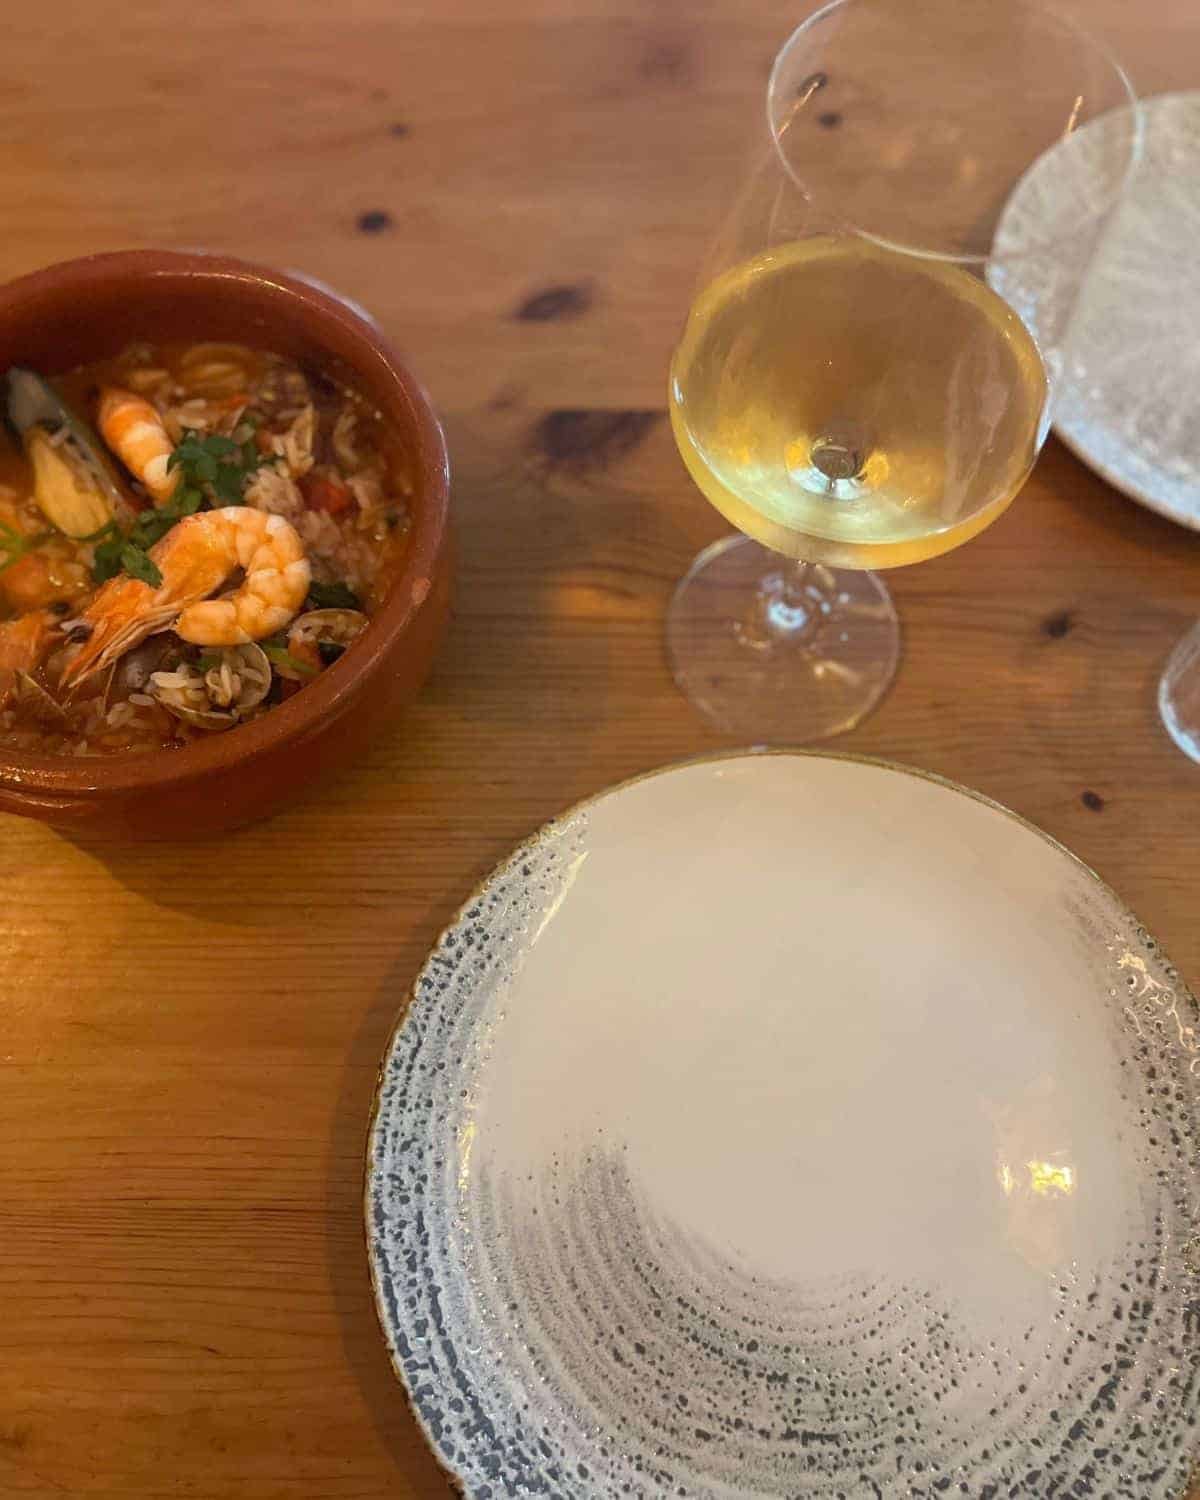 A table set with a plate, glass of wine and bowl with shirmp